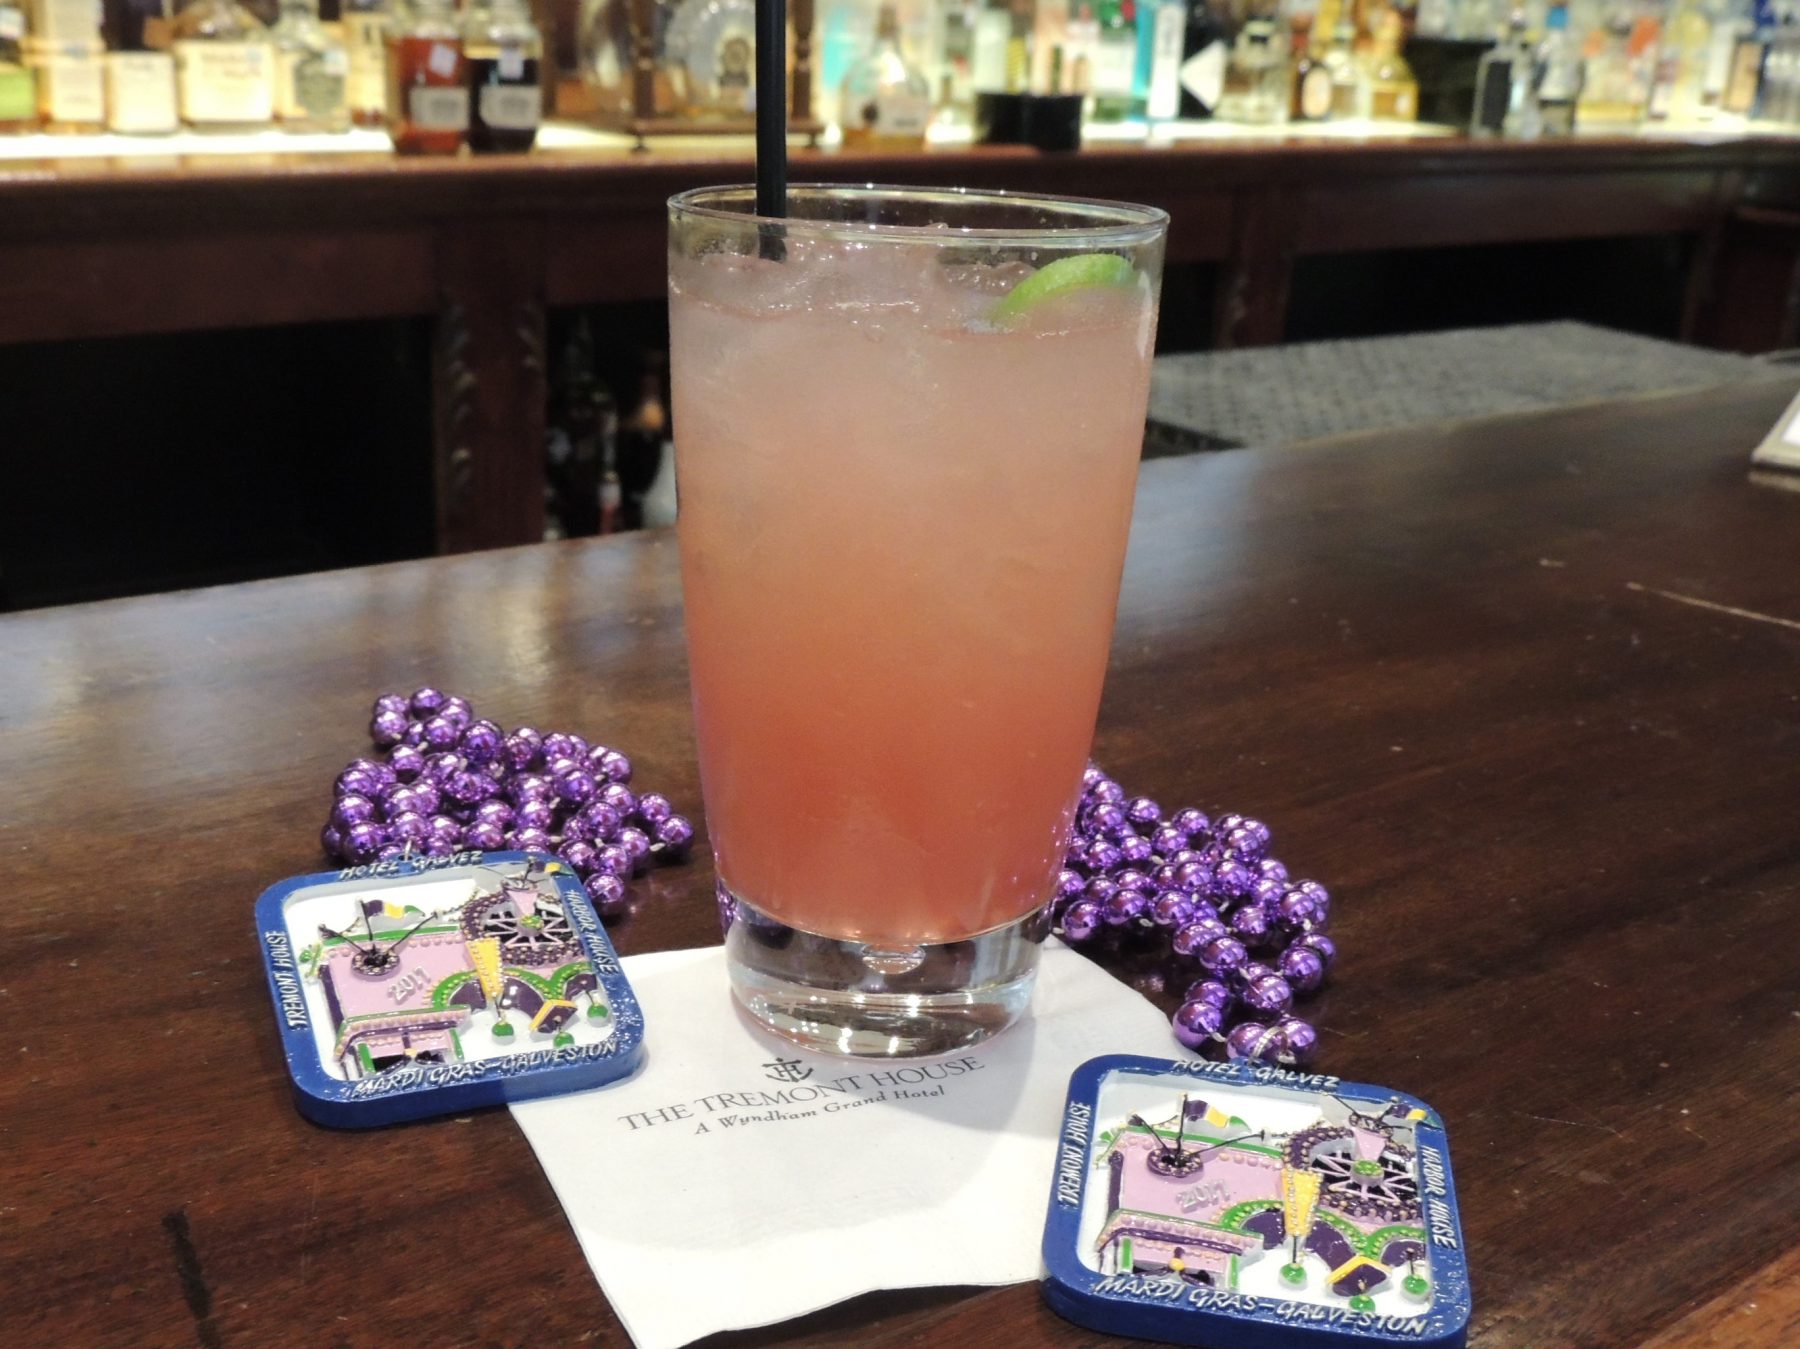 Mardi Gras Punch at Tremont House in Galveston. Photo by Melissa Gaskill.